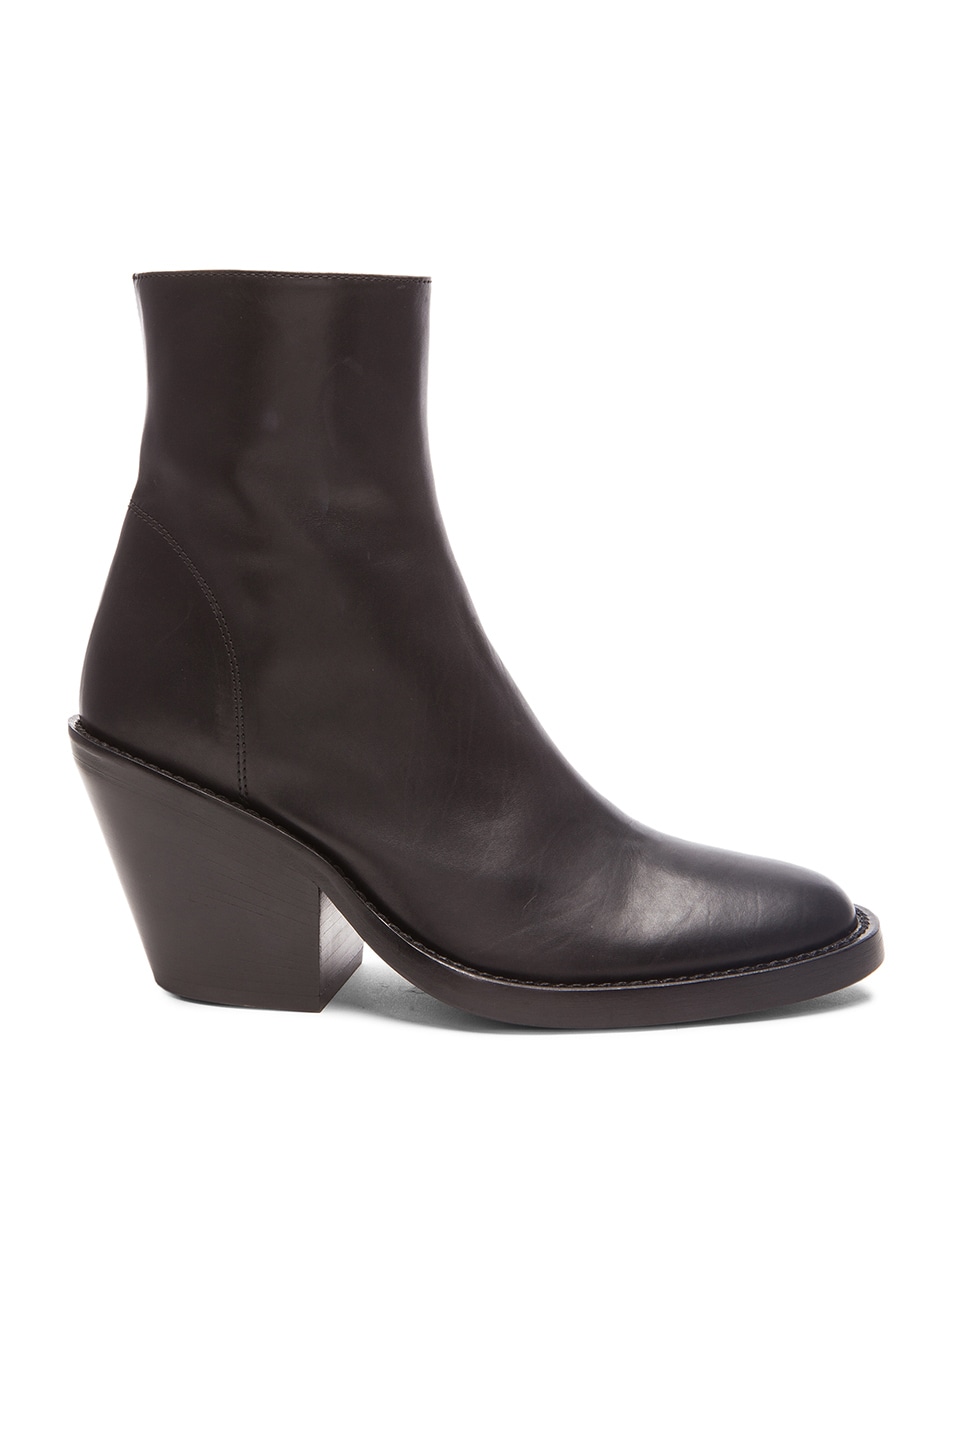 5 Stores In Stock: ANN DEMEULEMEESTER 70Mm Leather Ankle Boots, Black ...